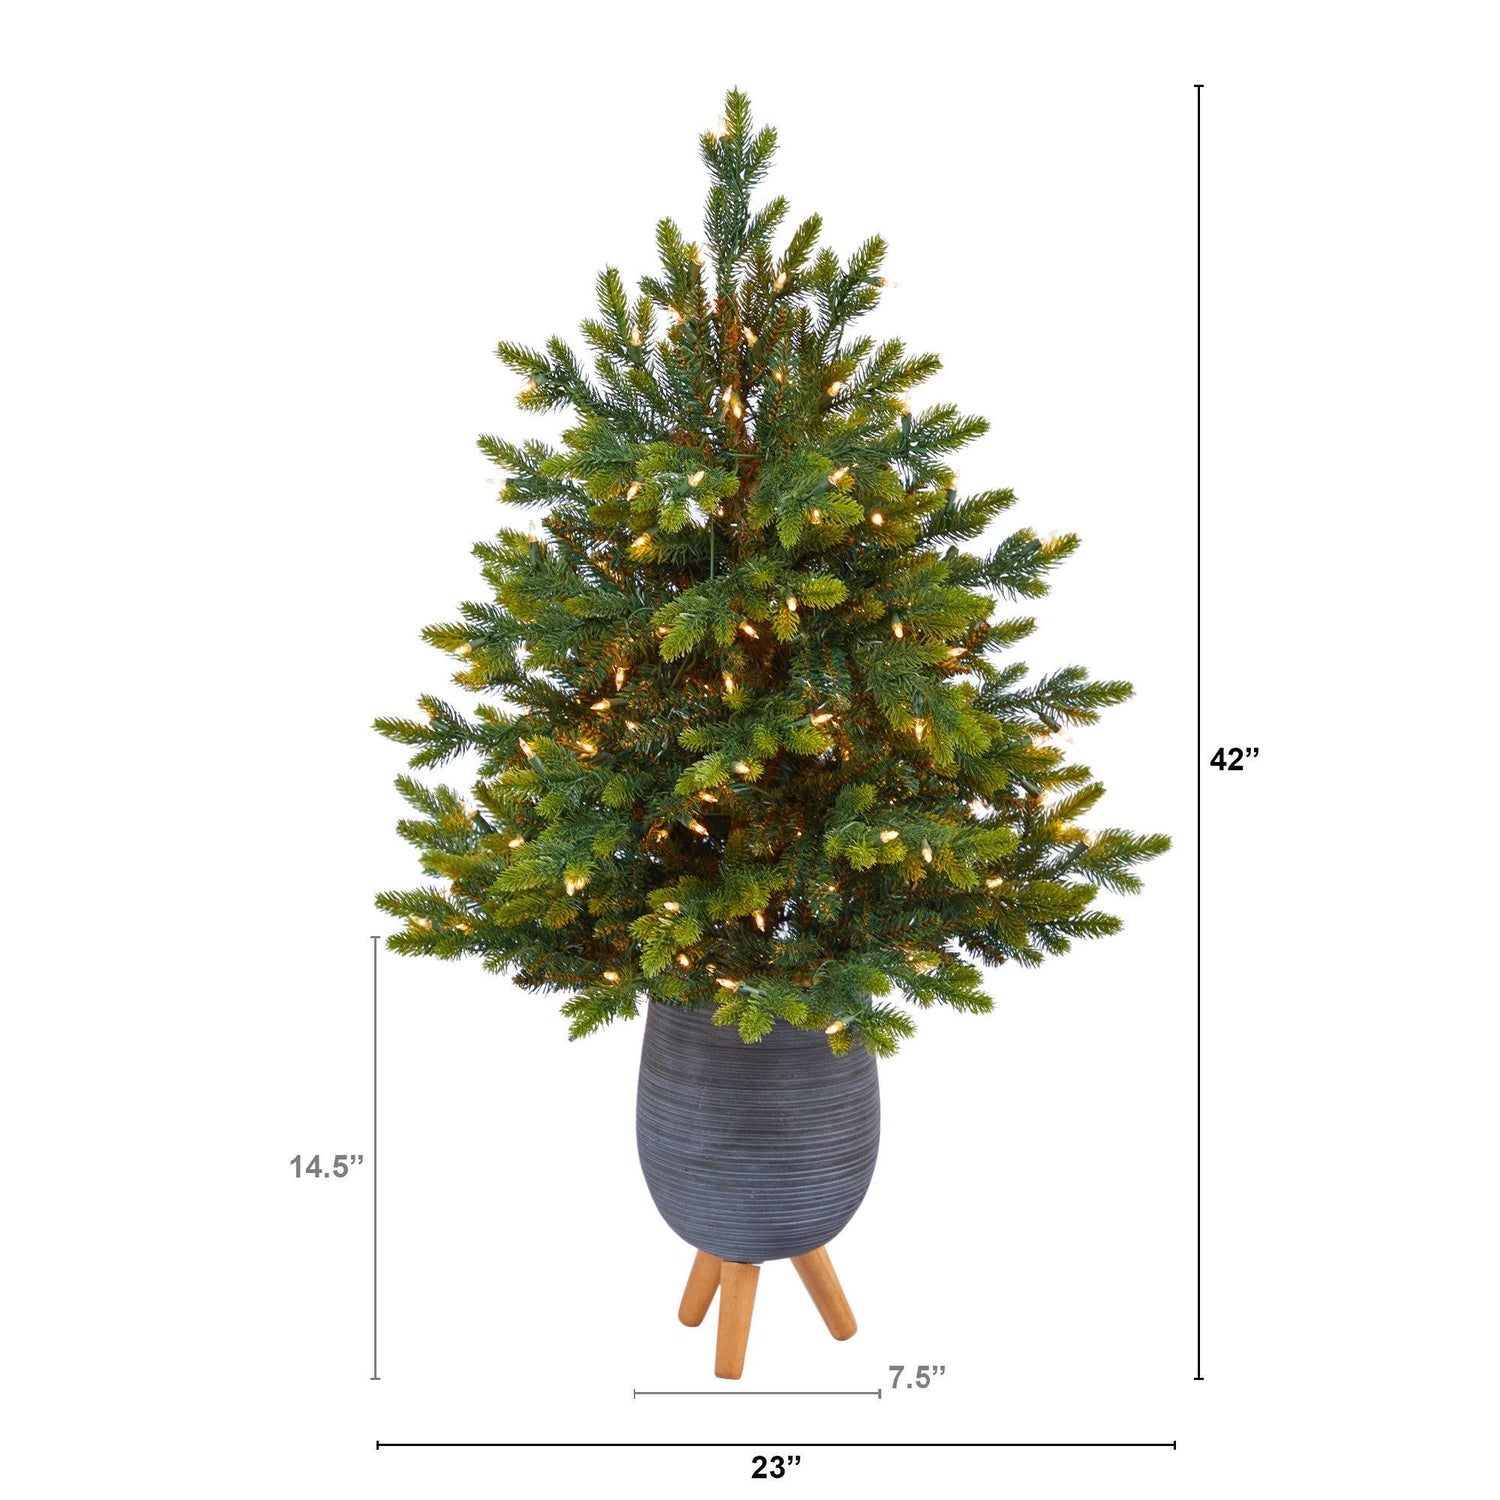 3.5’ North Carolina Fir Artificial Christmas Tree with 150 Clear Lights and 563 Bendable Branches in Gray Planter with Stand